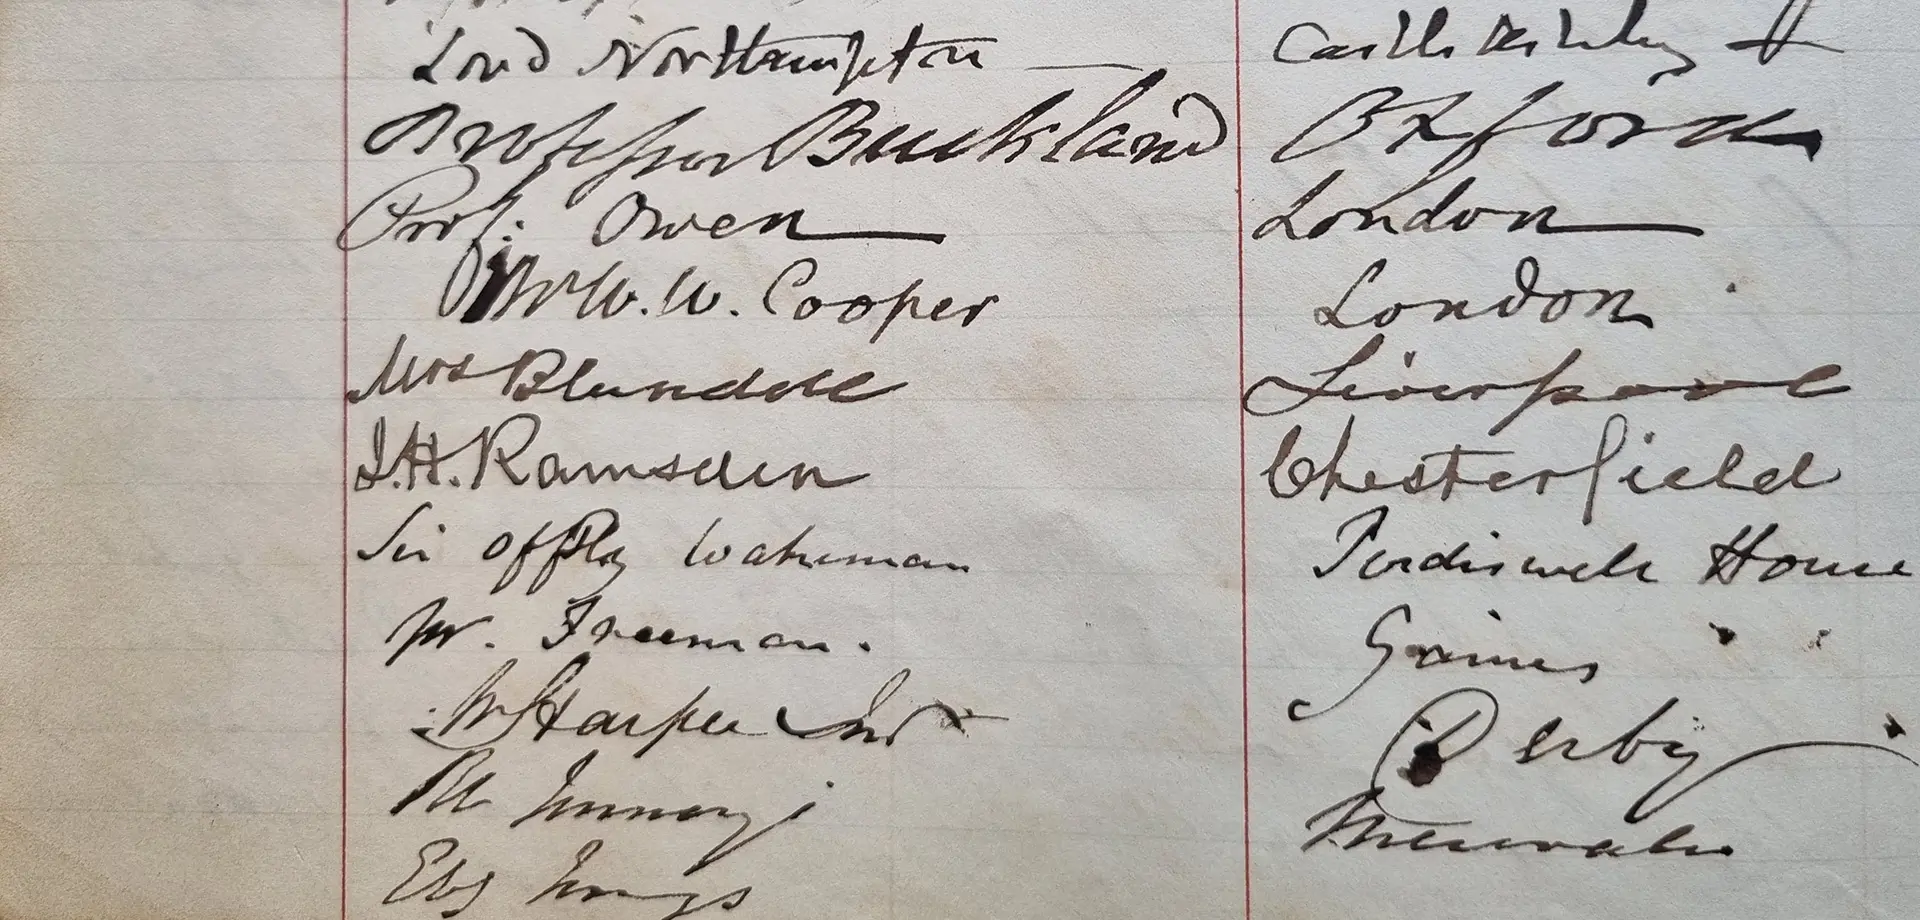 Visitor book entry by Richard Owen and William Buckland